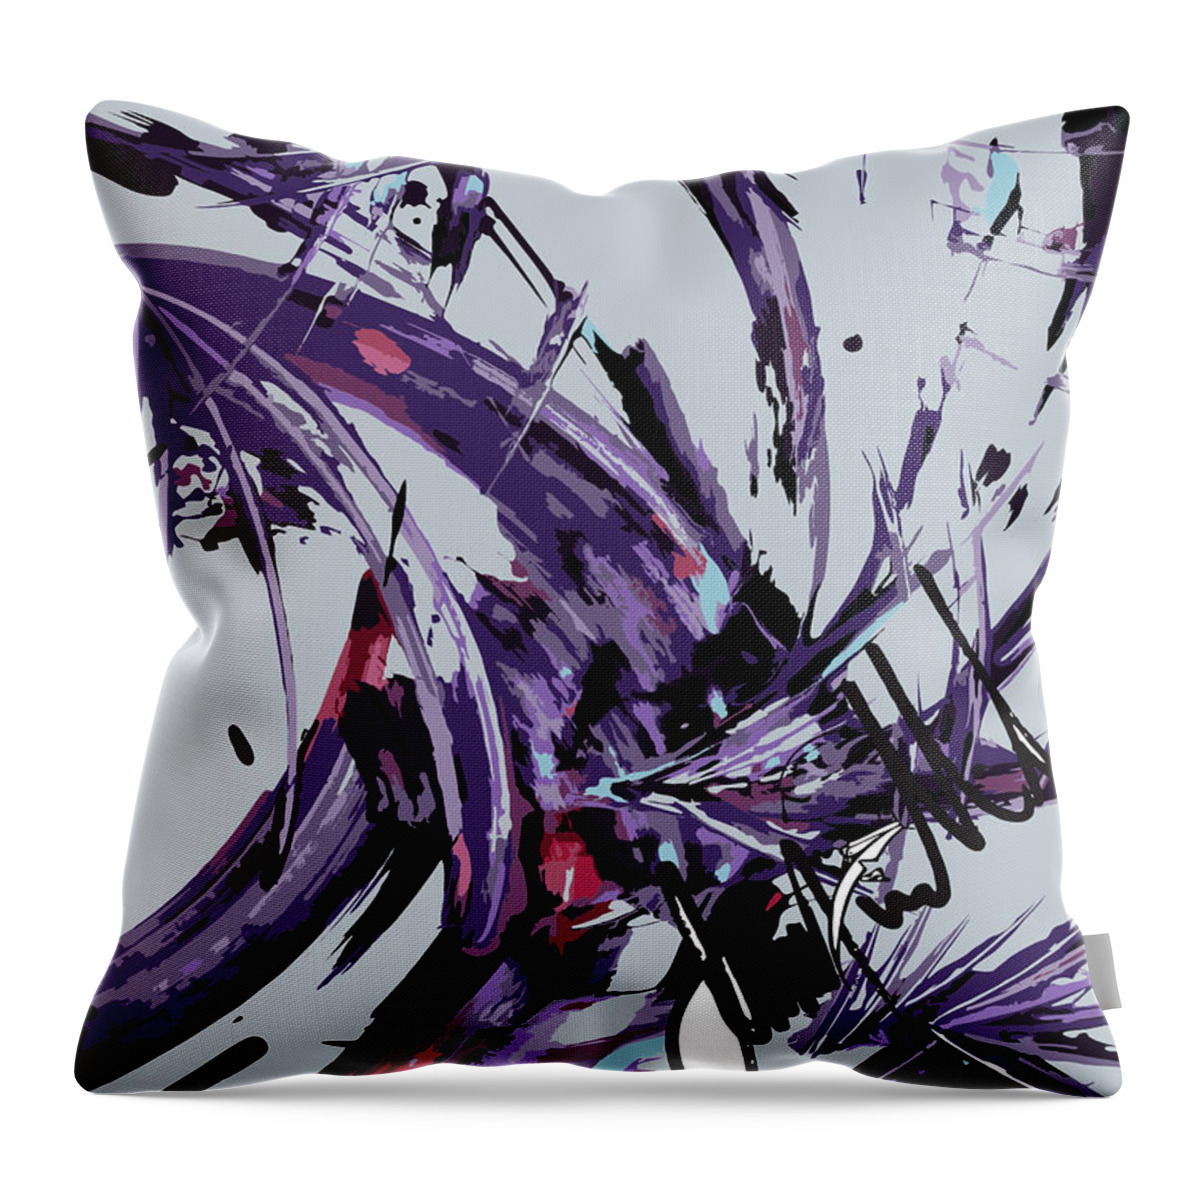  Throw Pillow featuring the digital art Drunking by Jimmy Williams